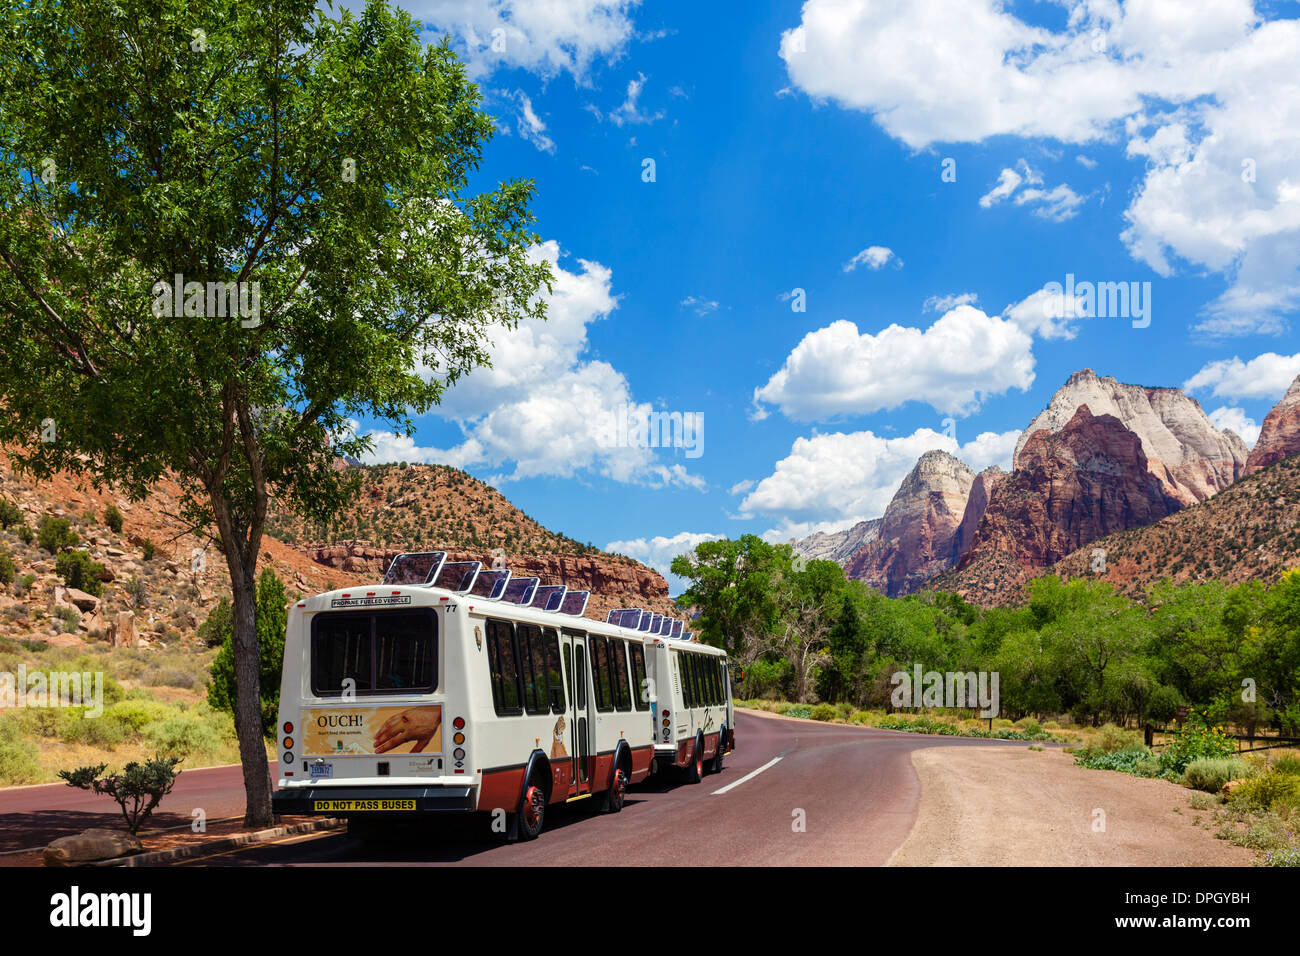 Zion Canyon shuttle bus on the scenic drive near the Museum, Zion National Park, Utah, USA Stock Photo